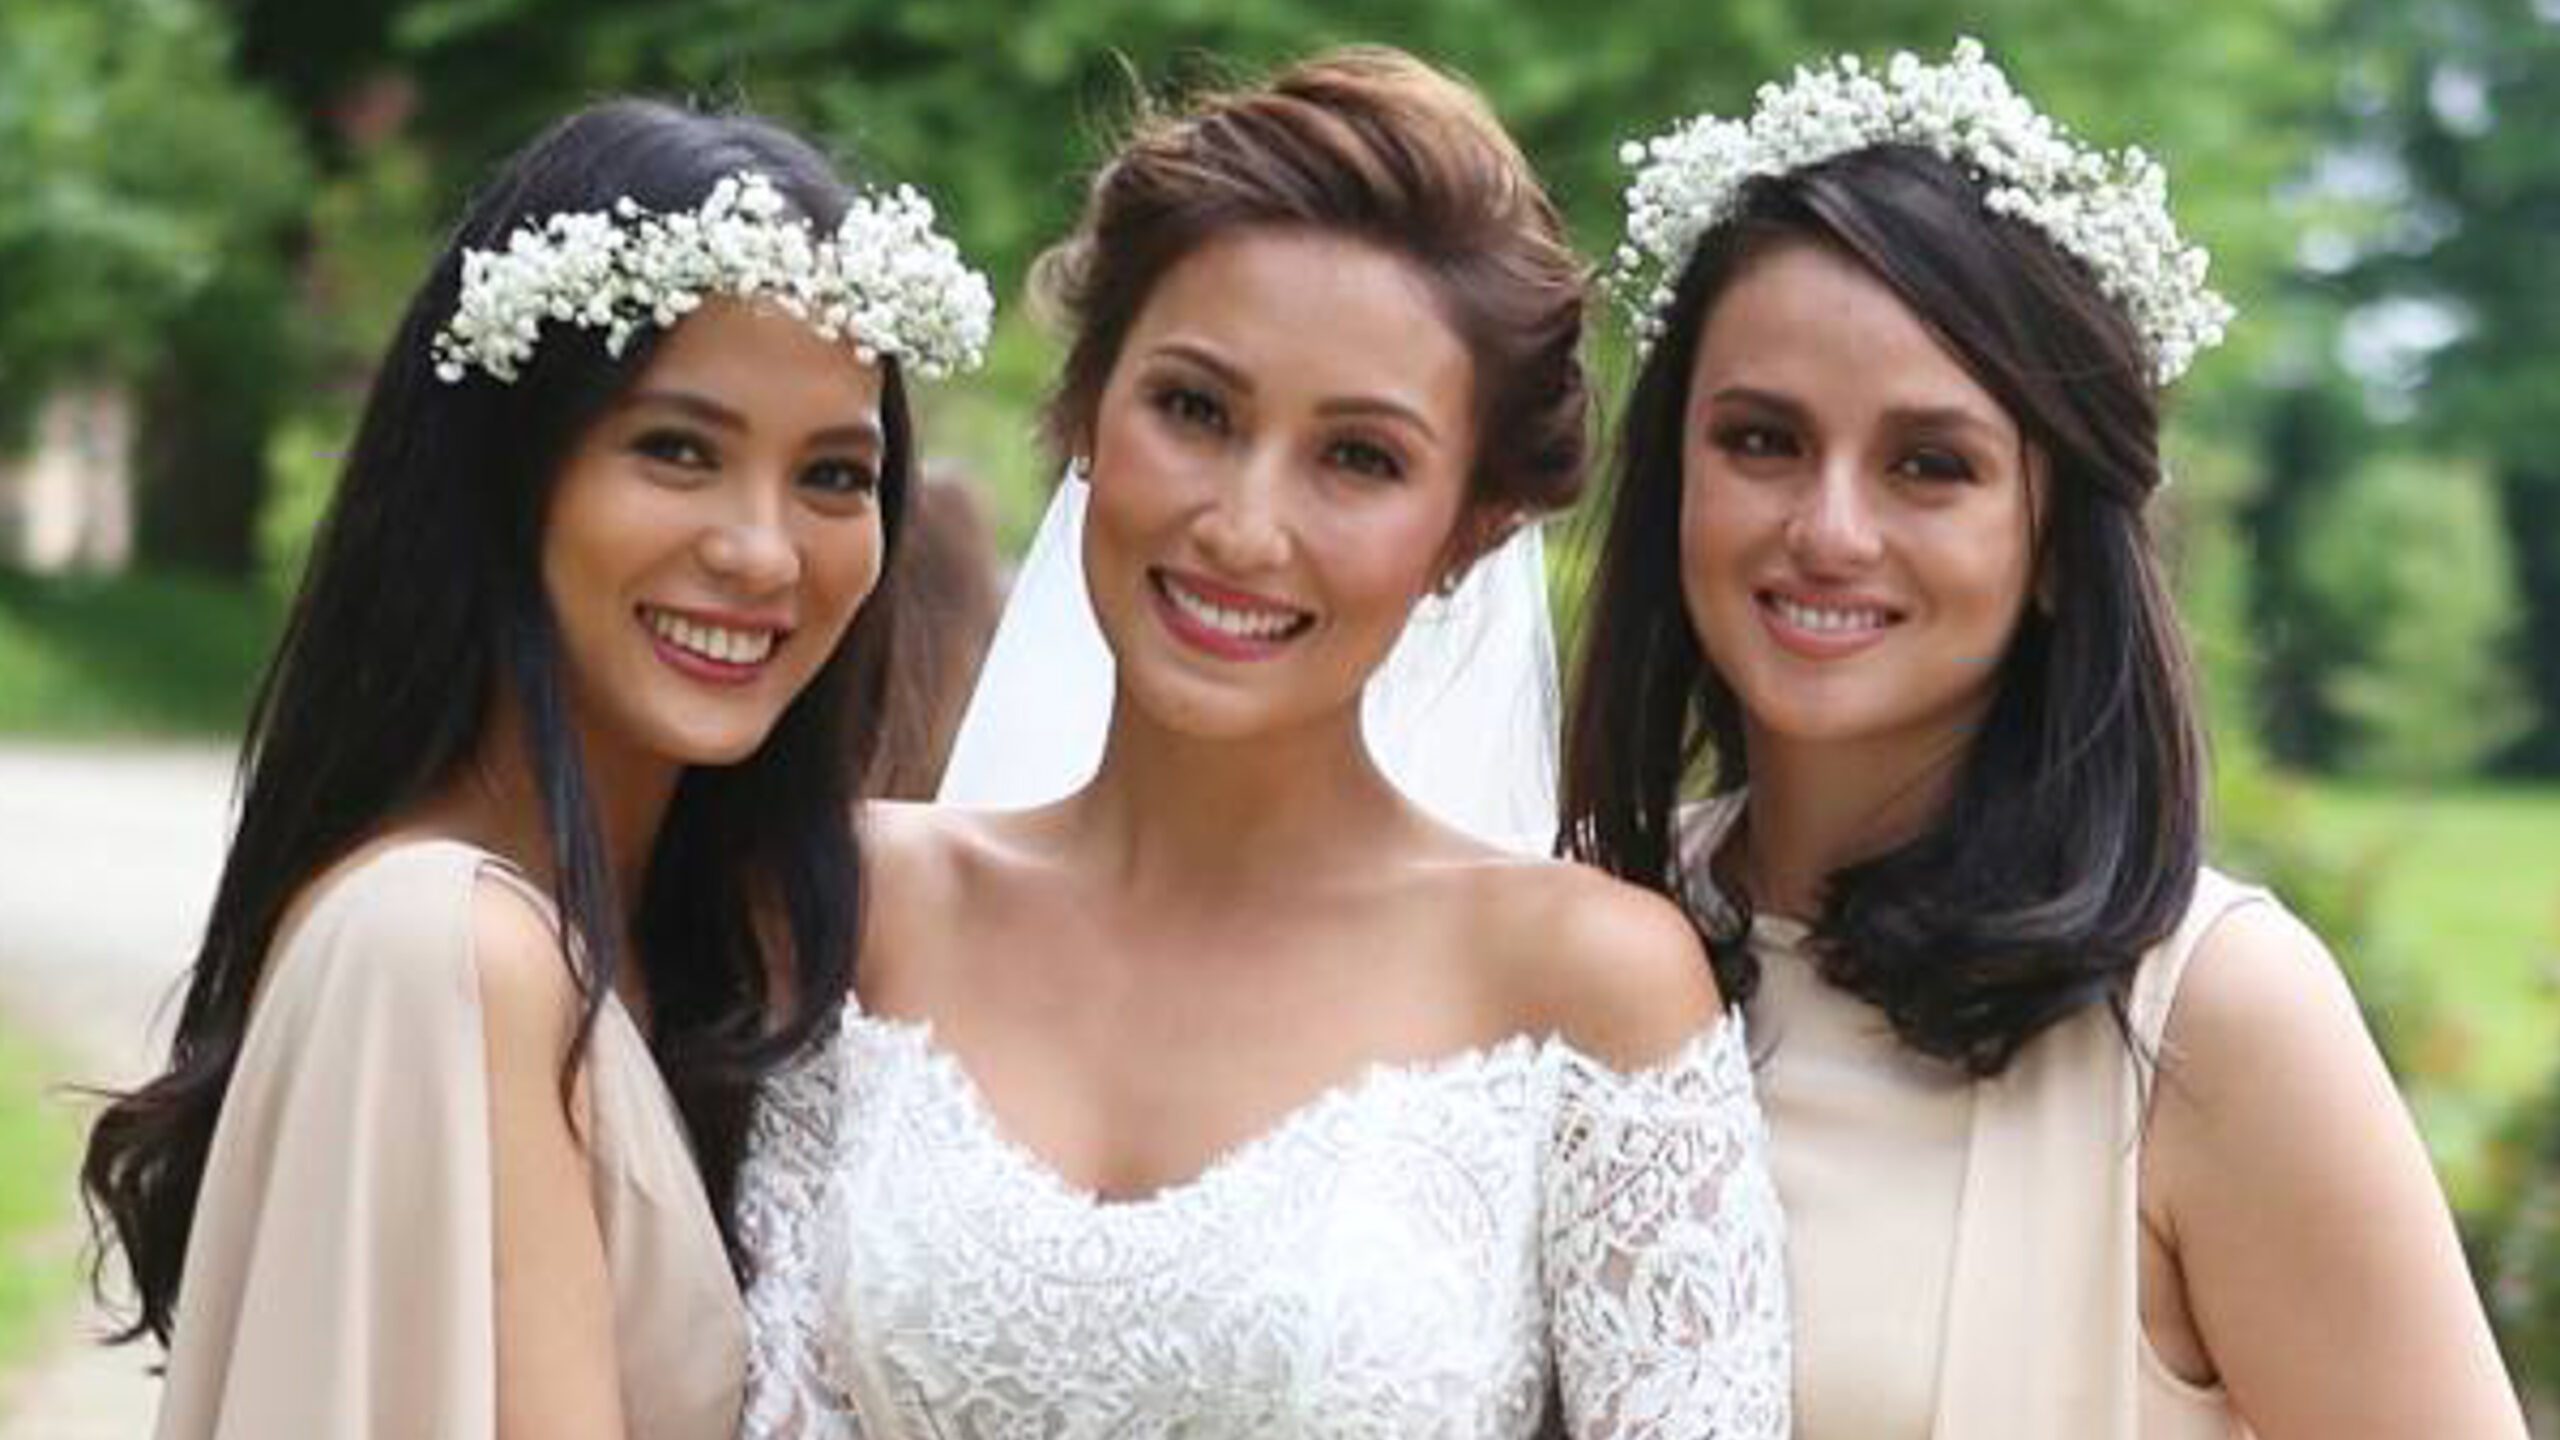 IN PHOTOS: Celebrity guests at Solenn Heussaff, Nico Bolzico’s wedding